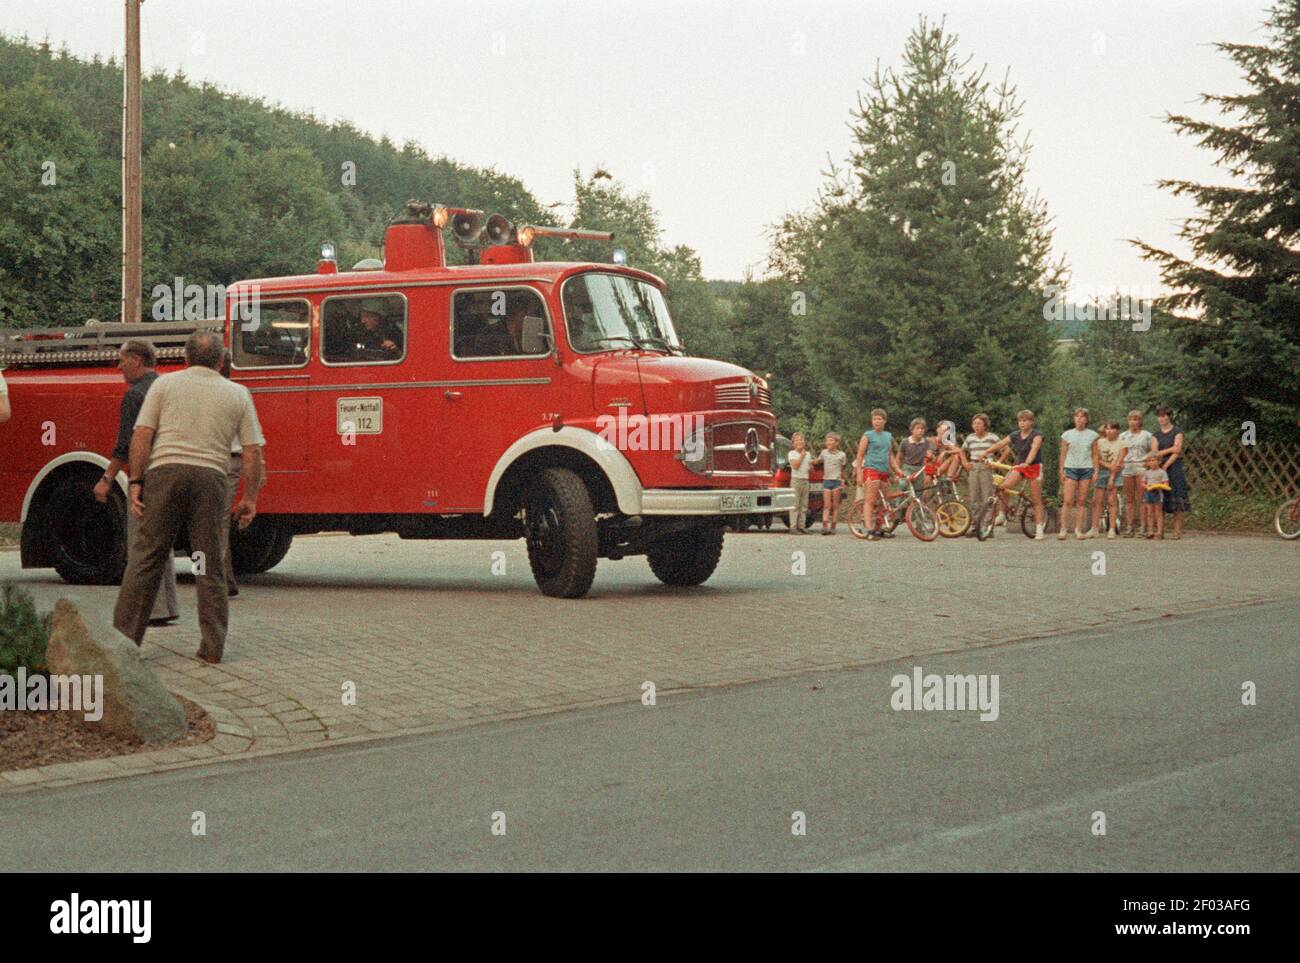 village youngsters watching a fire engine leave, August 14, 1985, Wenholthausen, Eslohe, Sauerland, North Rhine-Westphalia, Germany Stock Photo